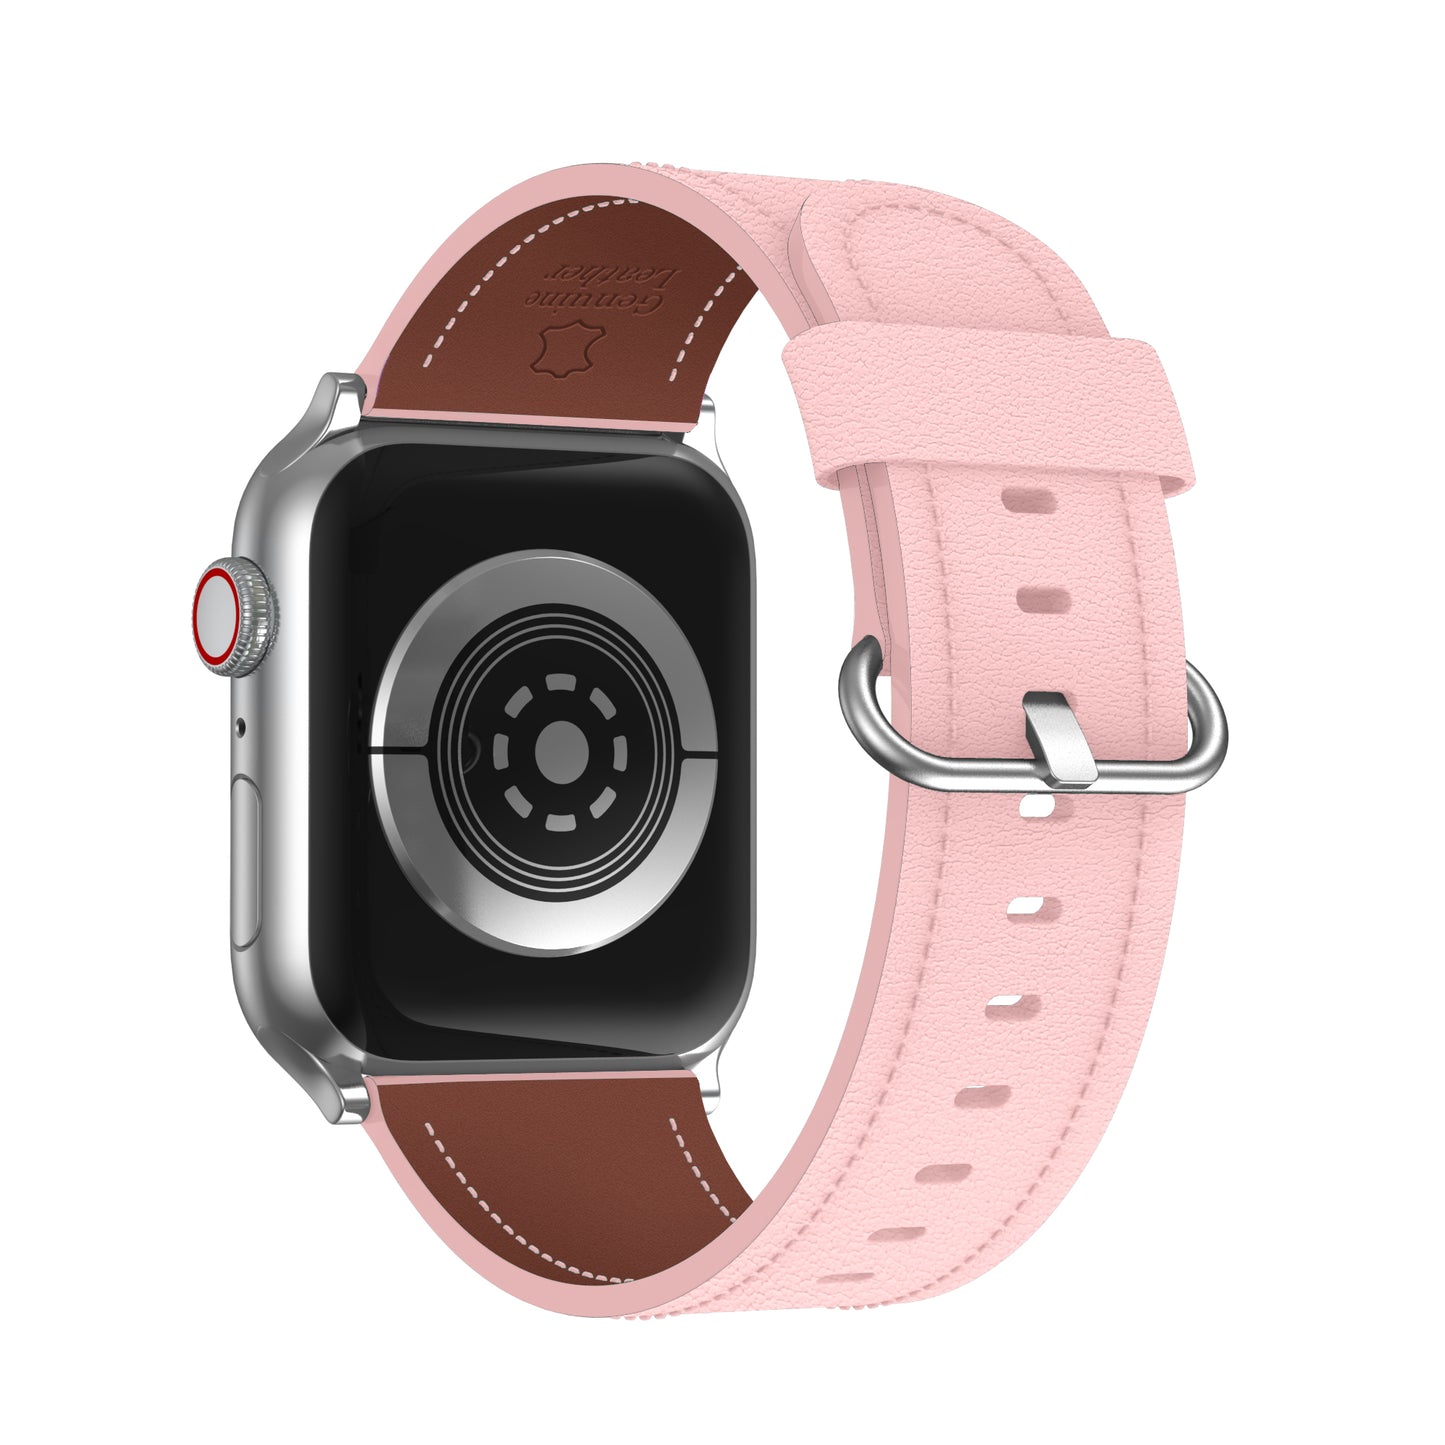 Waloo Classic Leather Band For Apple Watch